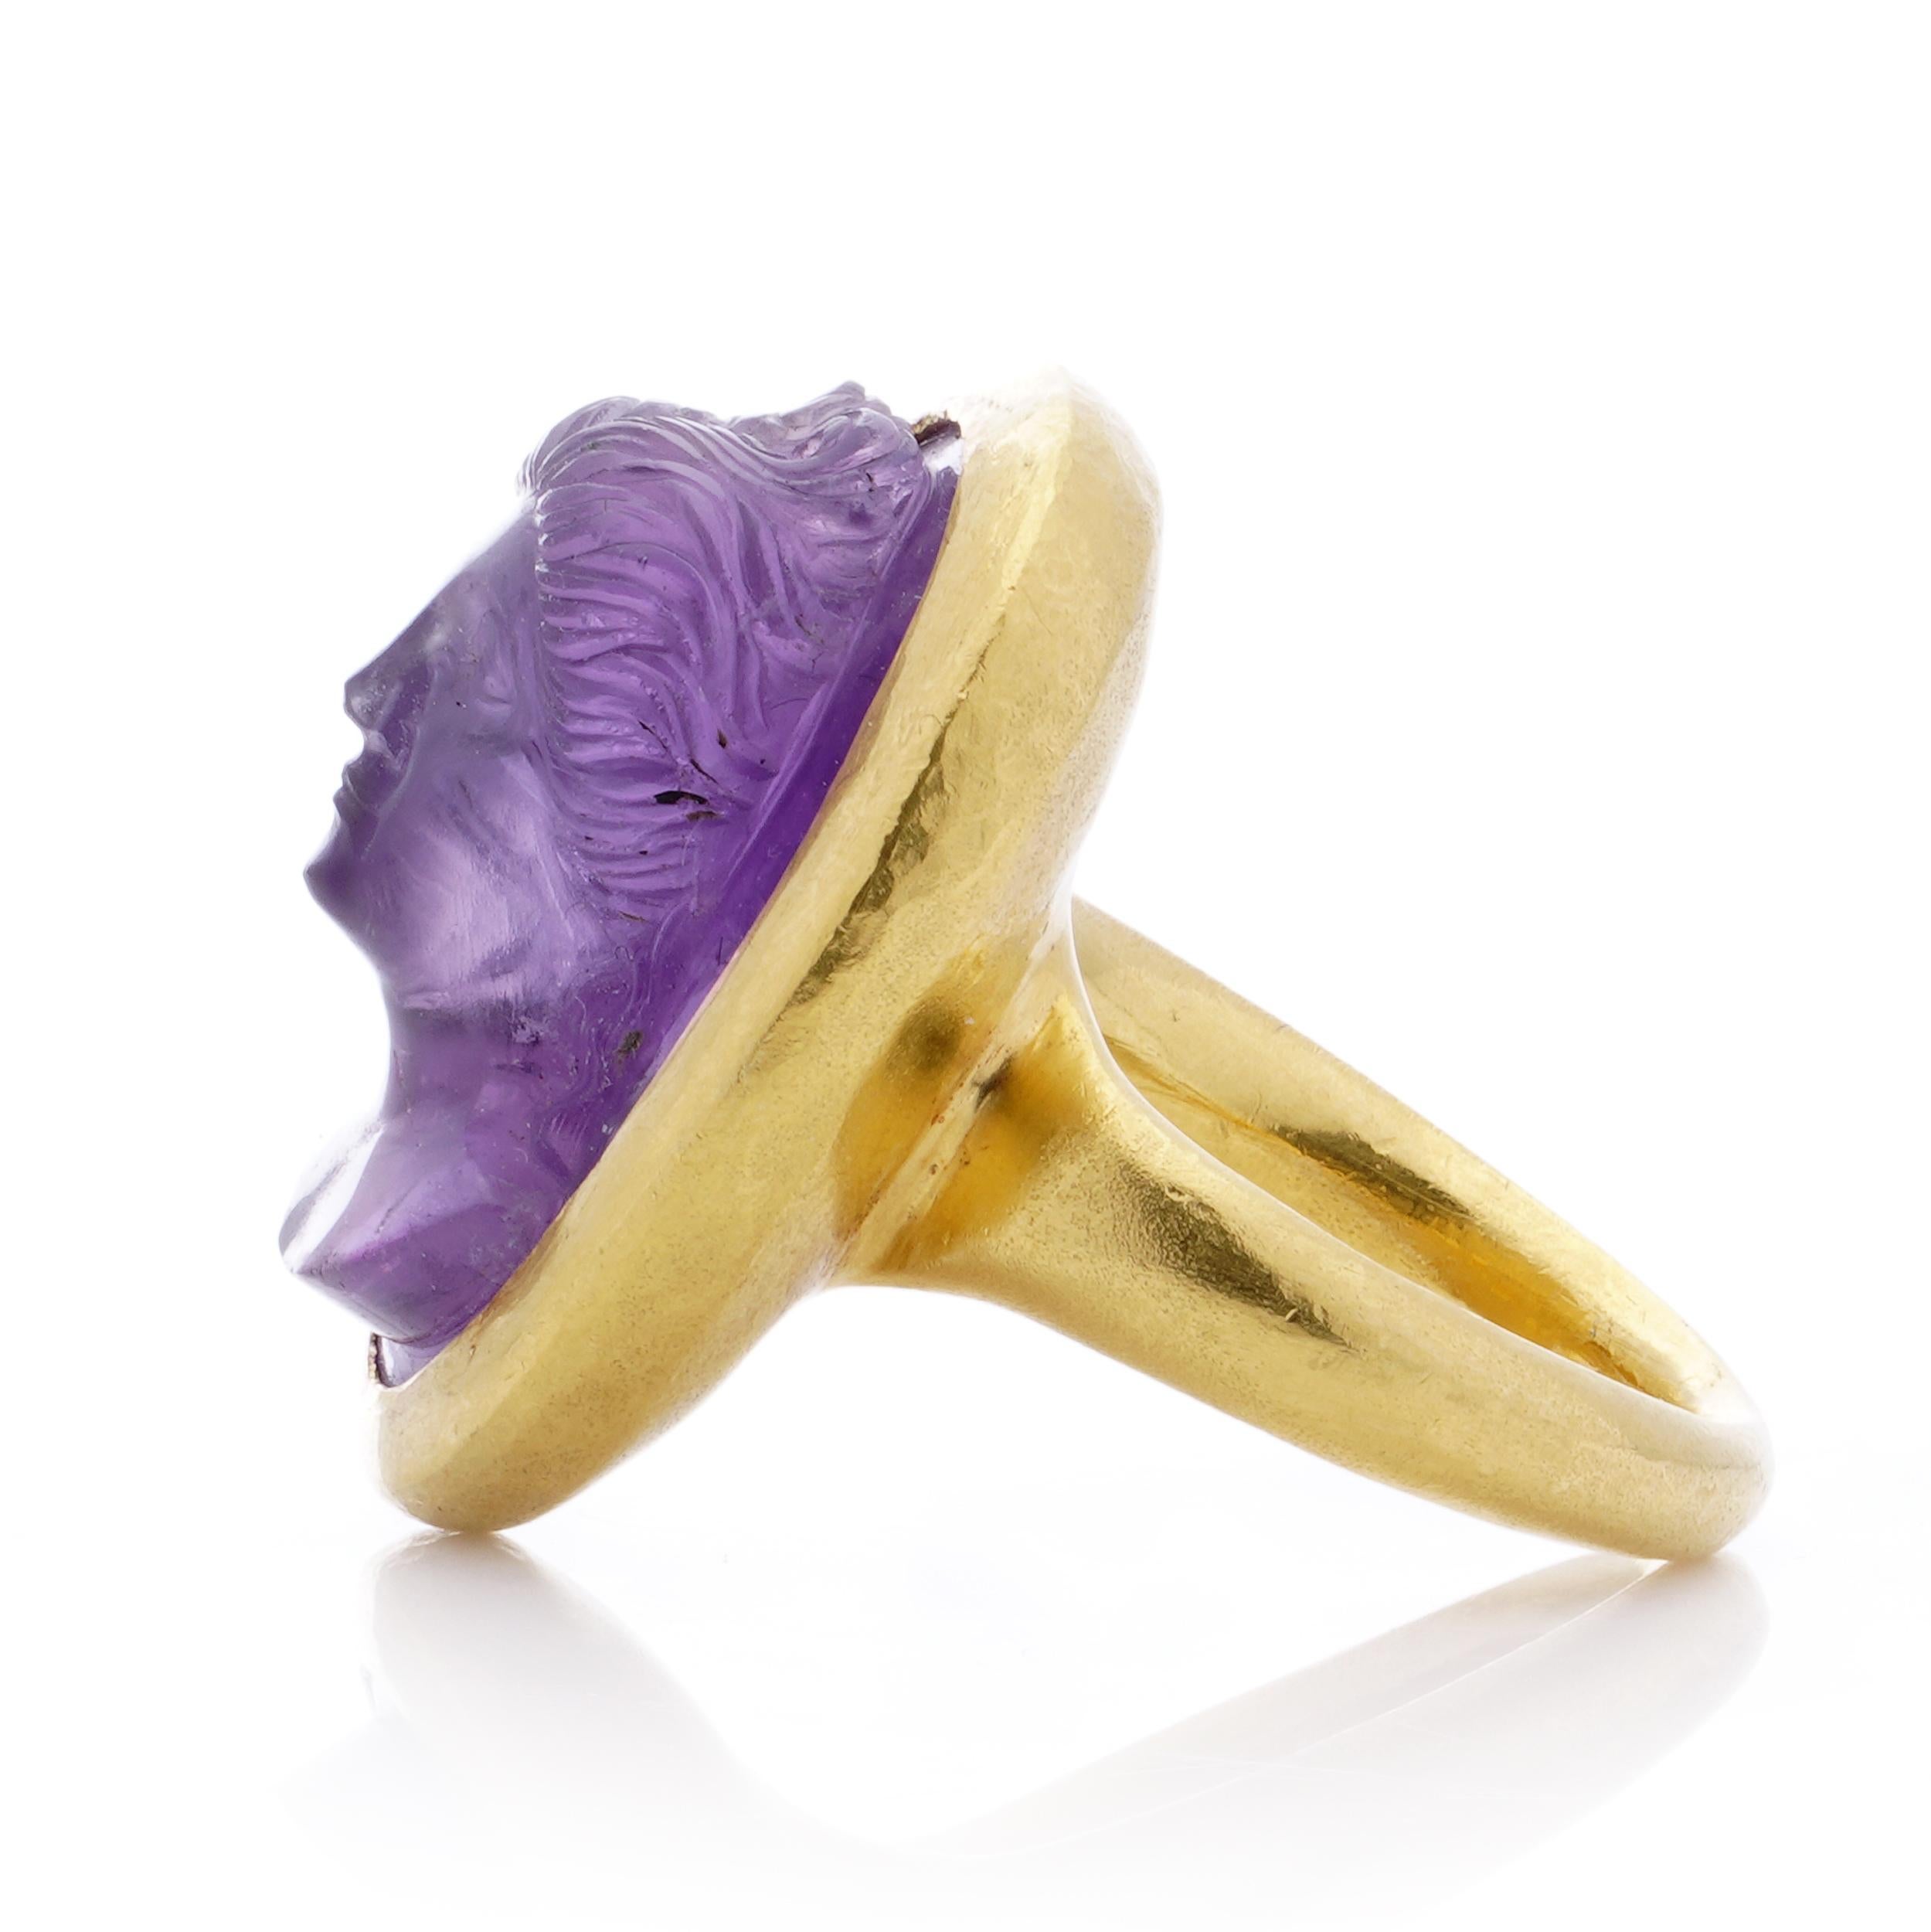  24kt. yellow gold carved amethyst intaglio ring with a woman's portrait For Sale 2